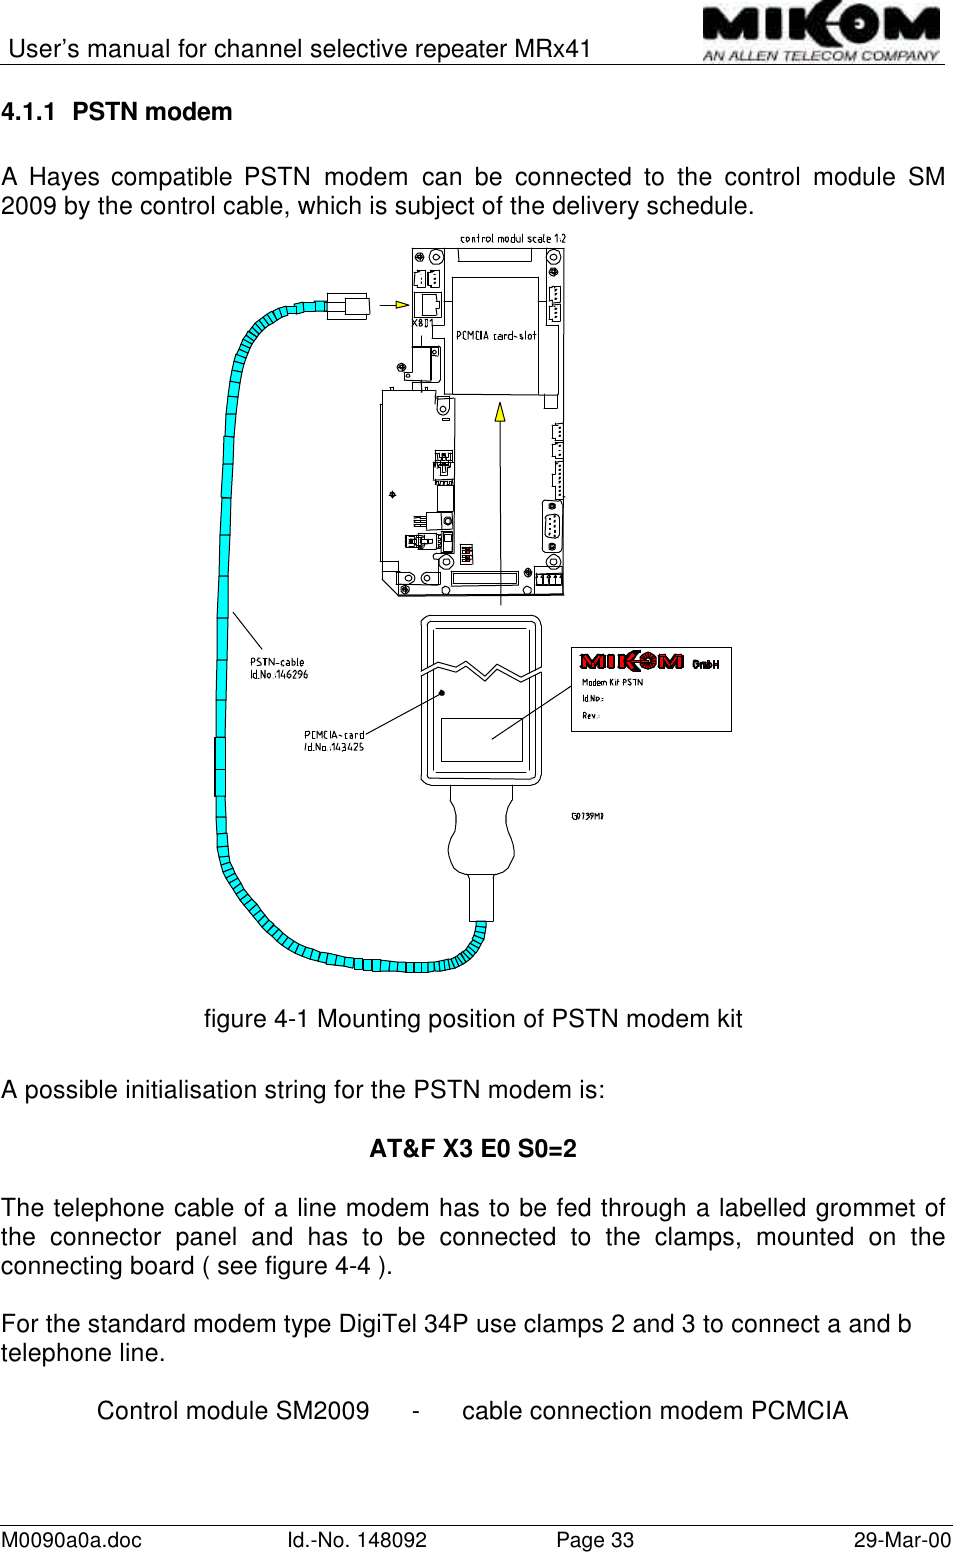 User’s manual for channel selective repeater MRx41M0090a0a.doc Id.-No. 148092 Page 33 29-Mar-004.1.1 PSTN modemA Hayes compatible PSTN modem can be connected to the control module SM2009 by the control cable, which is subject of the delivery schedule.figure 4-1 Mounting position of PSTN modem kitA possible initialisation string for the PSTN modem is:AT&amp;F X3 E0 S0=2The telephone cable of a line modem has to be fed through a labelled grommet ofthe connector panel and has to be connected to the clamps, mounted on theconnecting board ( see figure 4-4 ).For the standard modem type DigiTel 34P use clamps 2 and 3 to connect a and btelephone line.Control module SM2009      -      cable connection modem PCMCIA